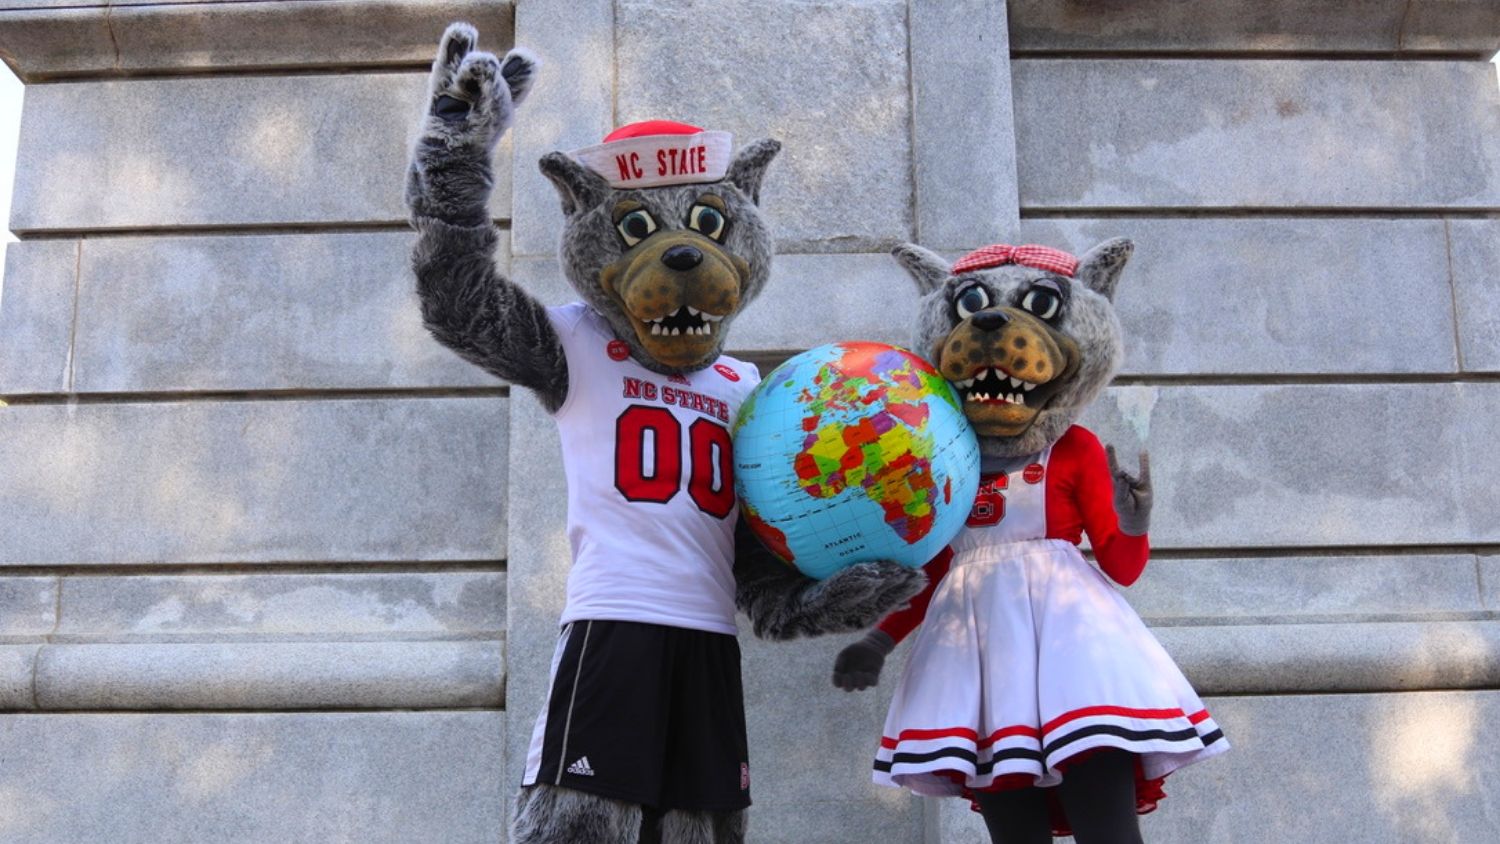 NC State's mascots, Mr and Mrs. Wuf, are holding a globe in front of the belltower.